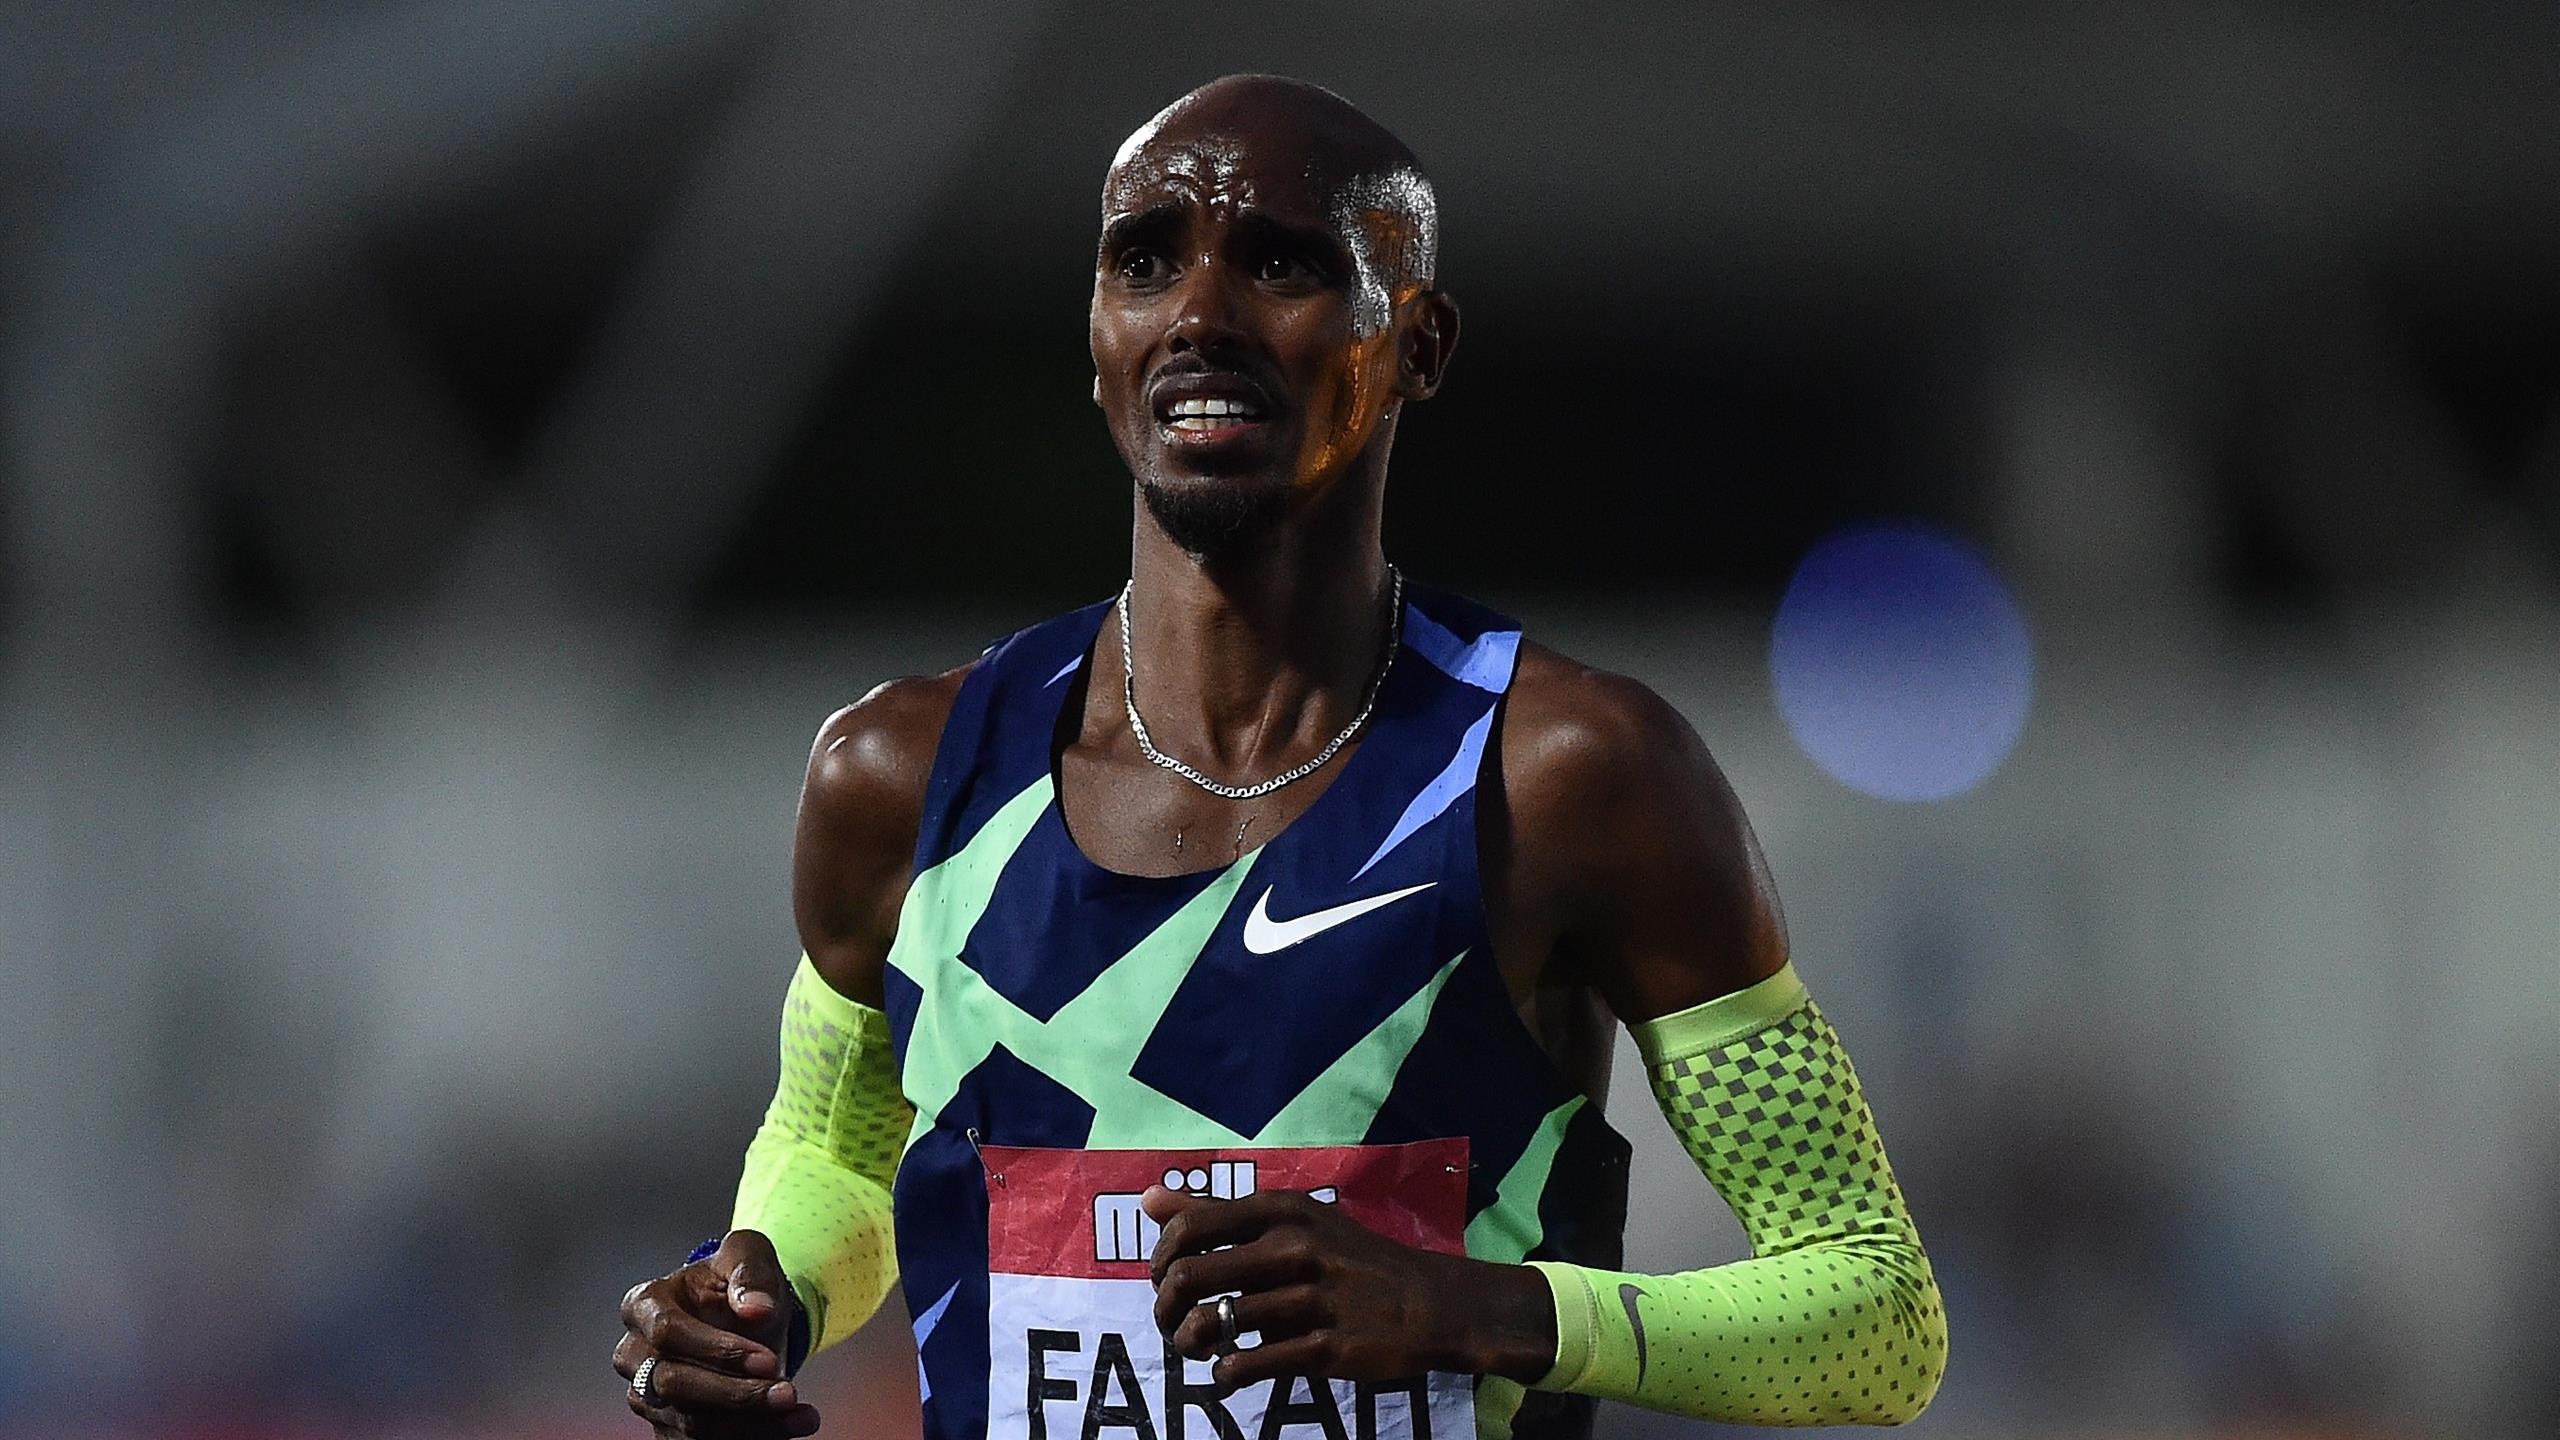 Mo Farah, trafficked illegally, real name, Hussein, 2560x1440 HD Desktop